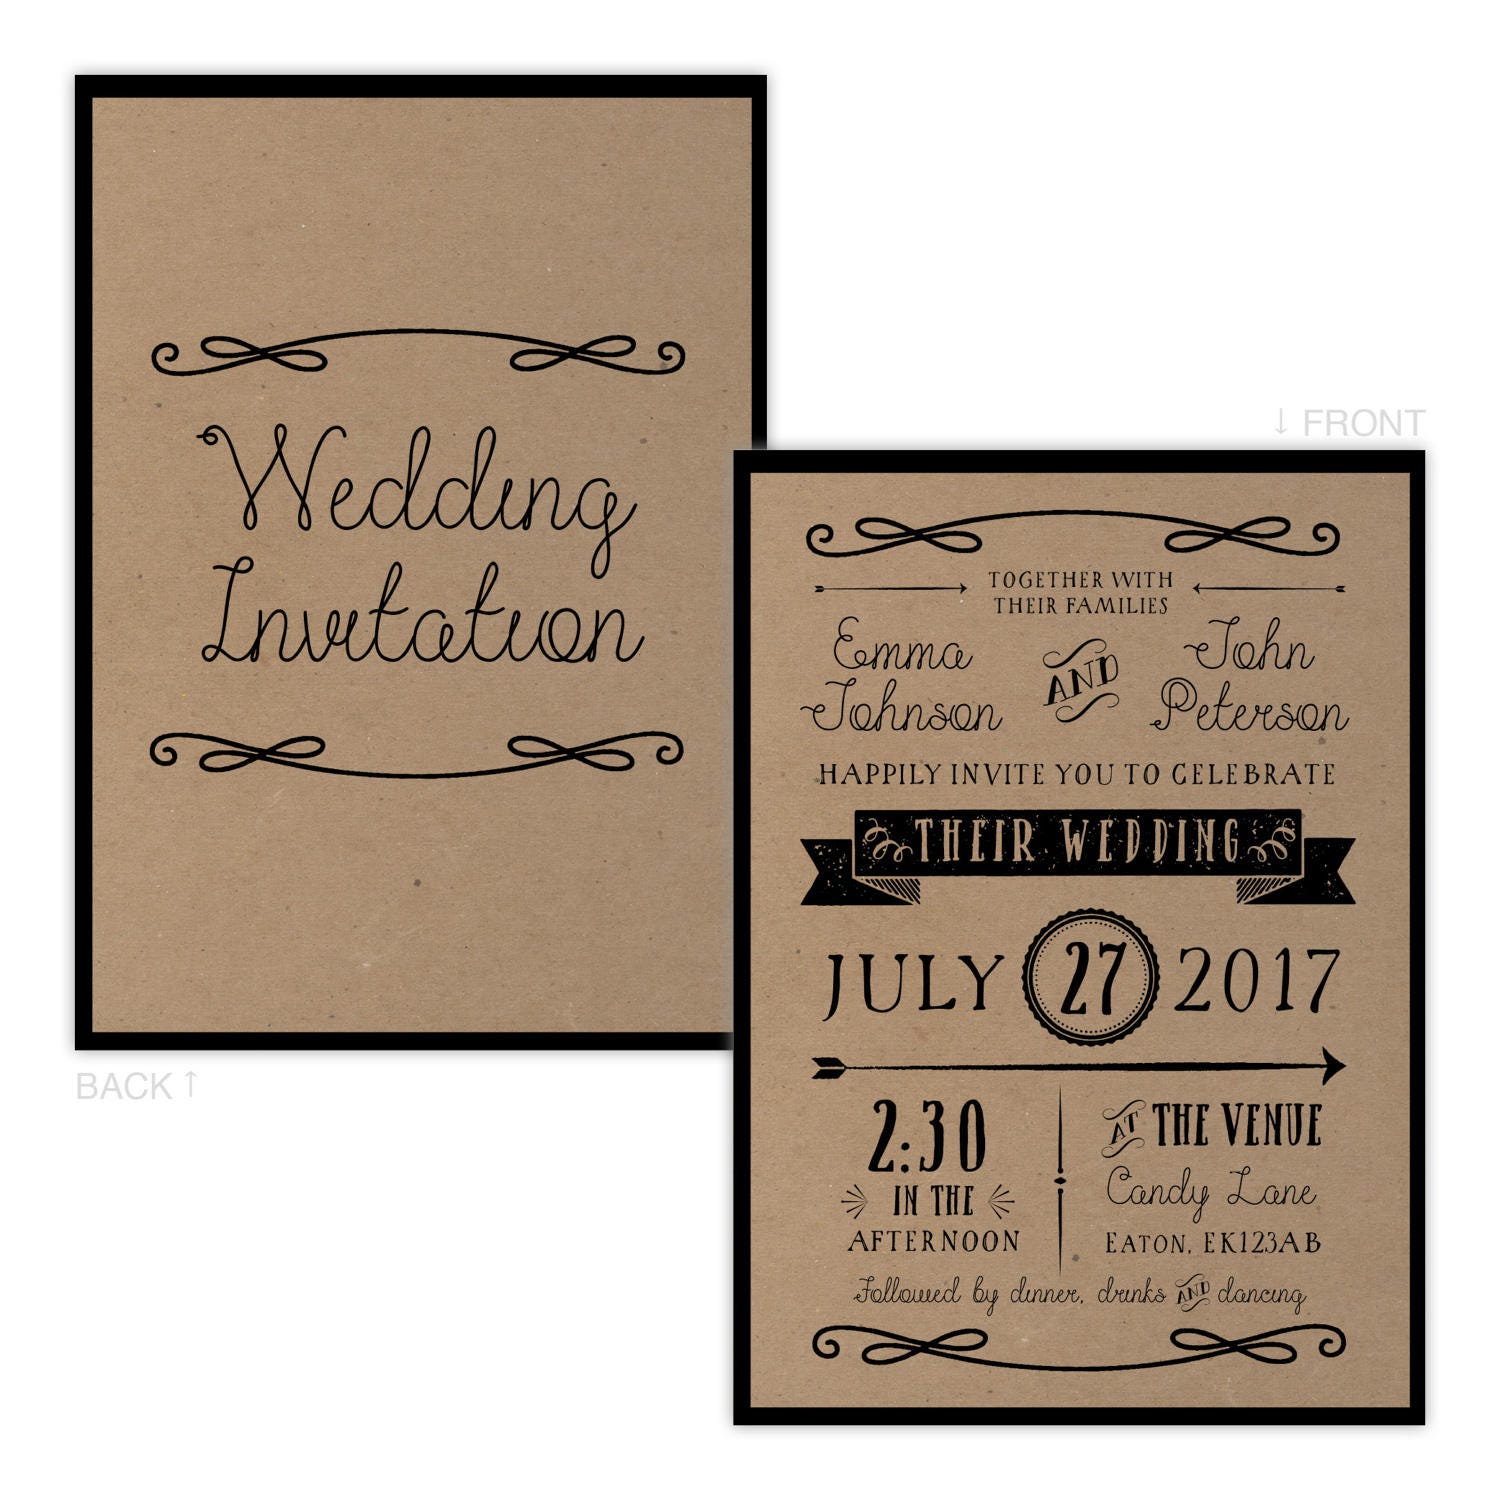 Rustic recycled ornate festival kraft wedding invitations with | Etsy